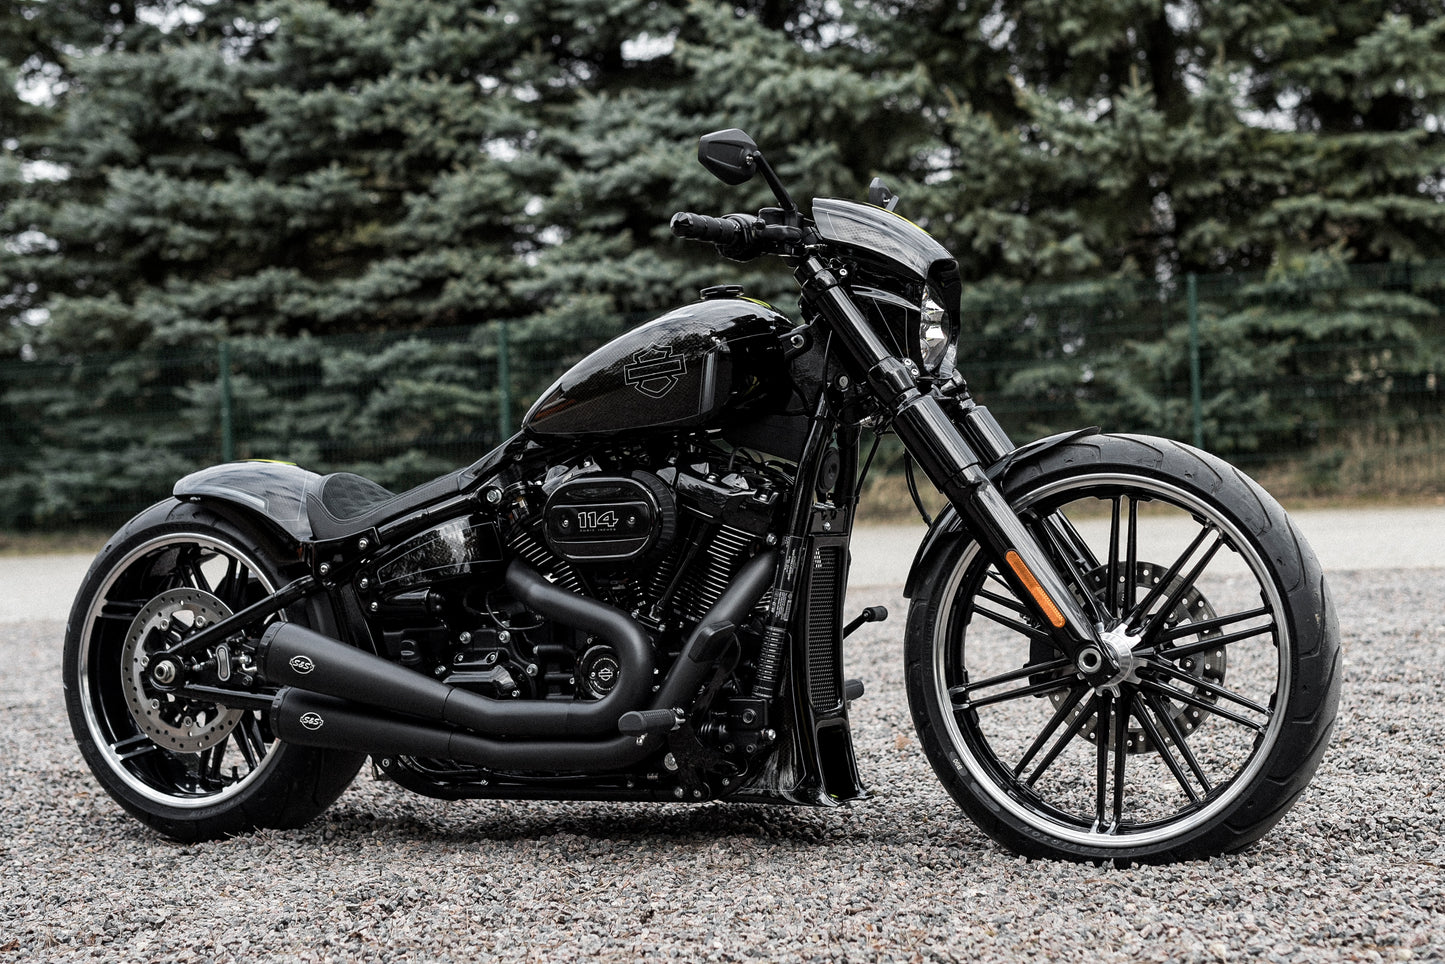 Harley Davidson motorcycle with Killer Custom front fender from the side in a nature environment